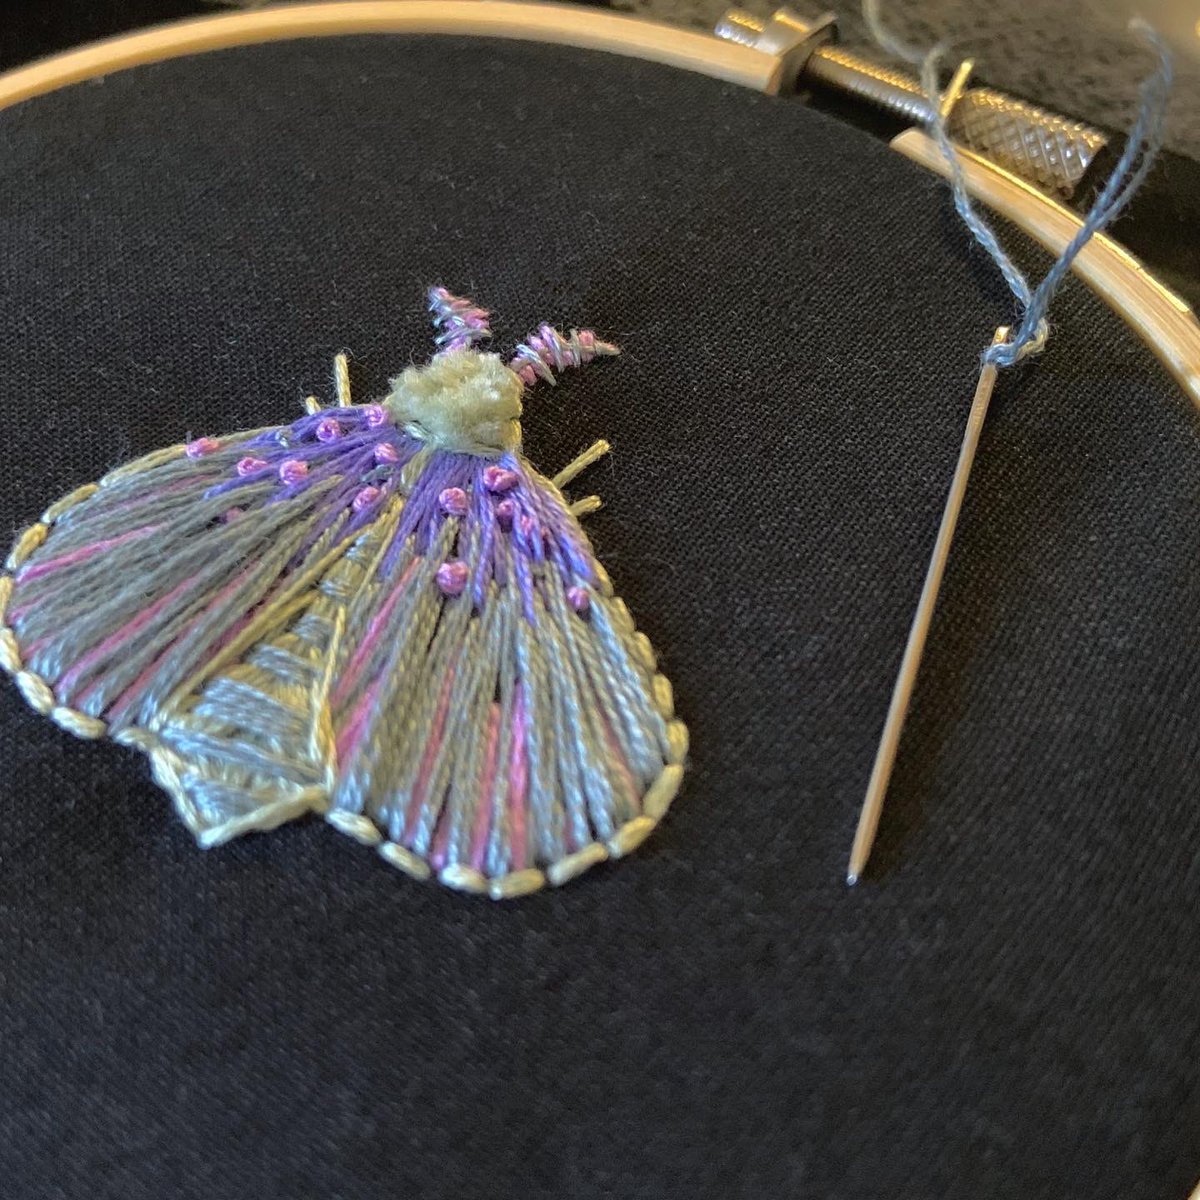 just a smol pastel moth #embroidery #mothembroidery